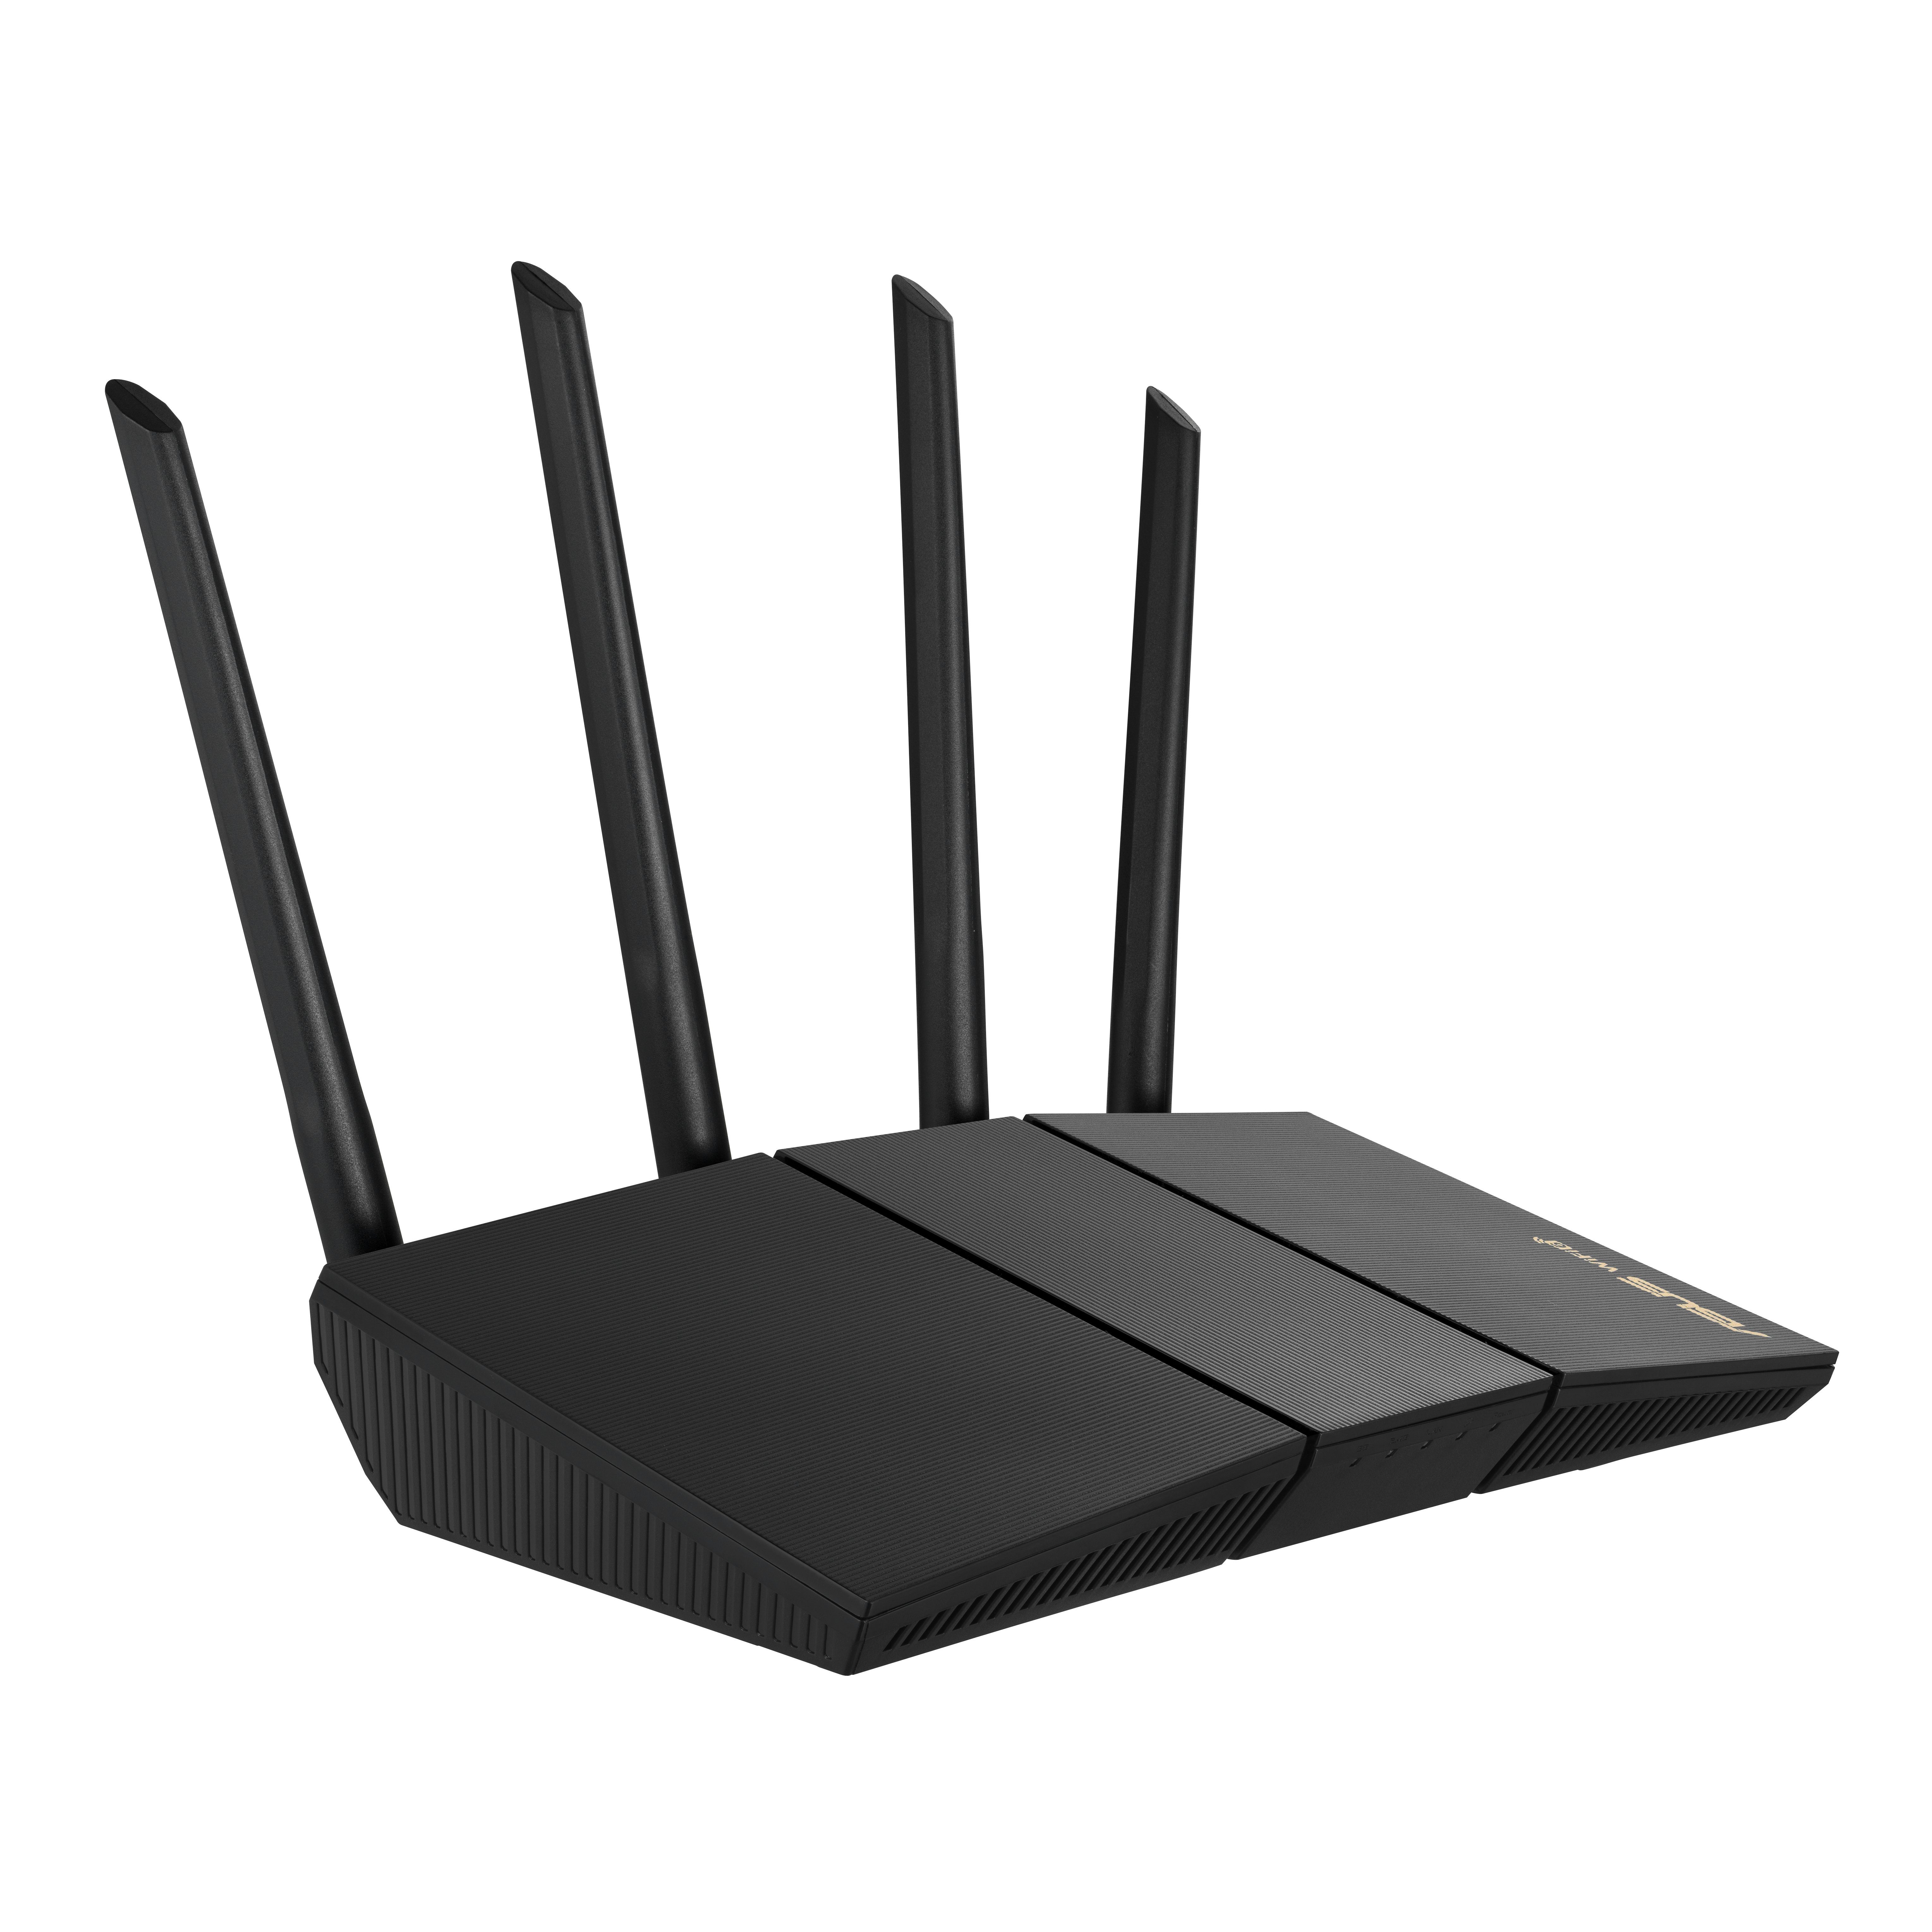 WLAN-Router Router WiFi 6 AX3000 RT-AX57 Asus Asus AiMesh